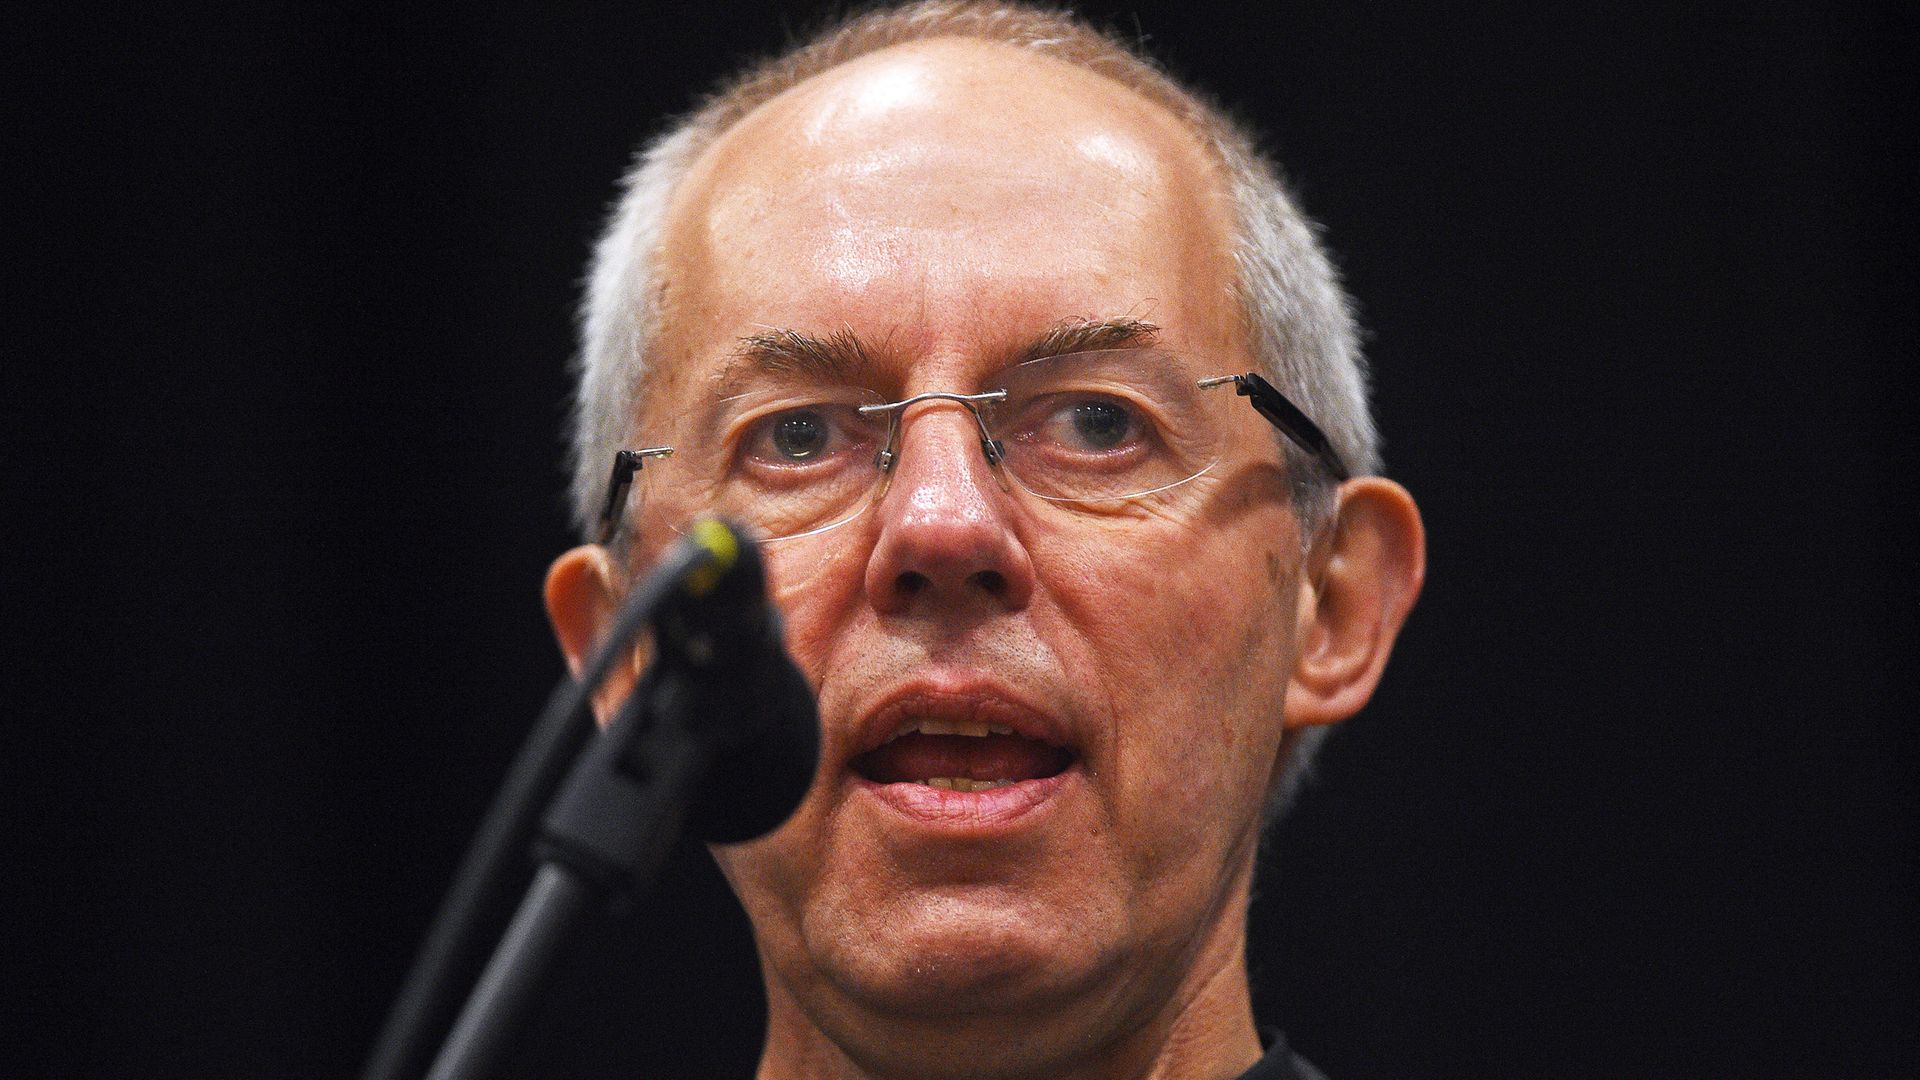 The Archbishop of Canterbury Justin Welby has criticised Boris Johnson's internal market bill during a sitting in the House of Lords - Credit: PA